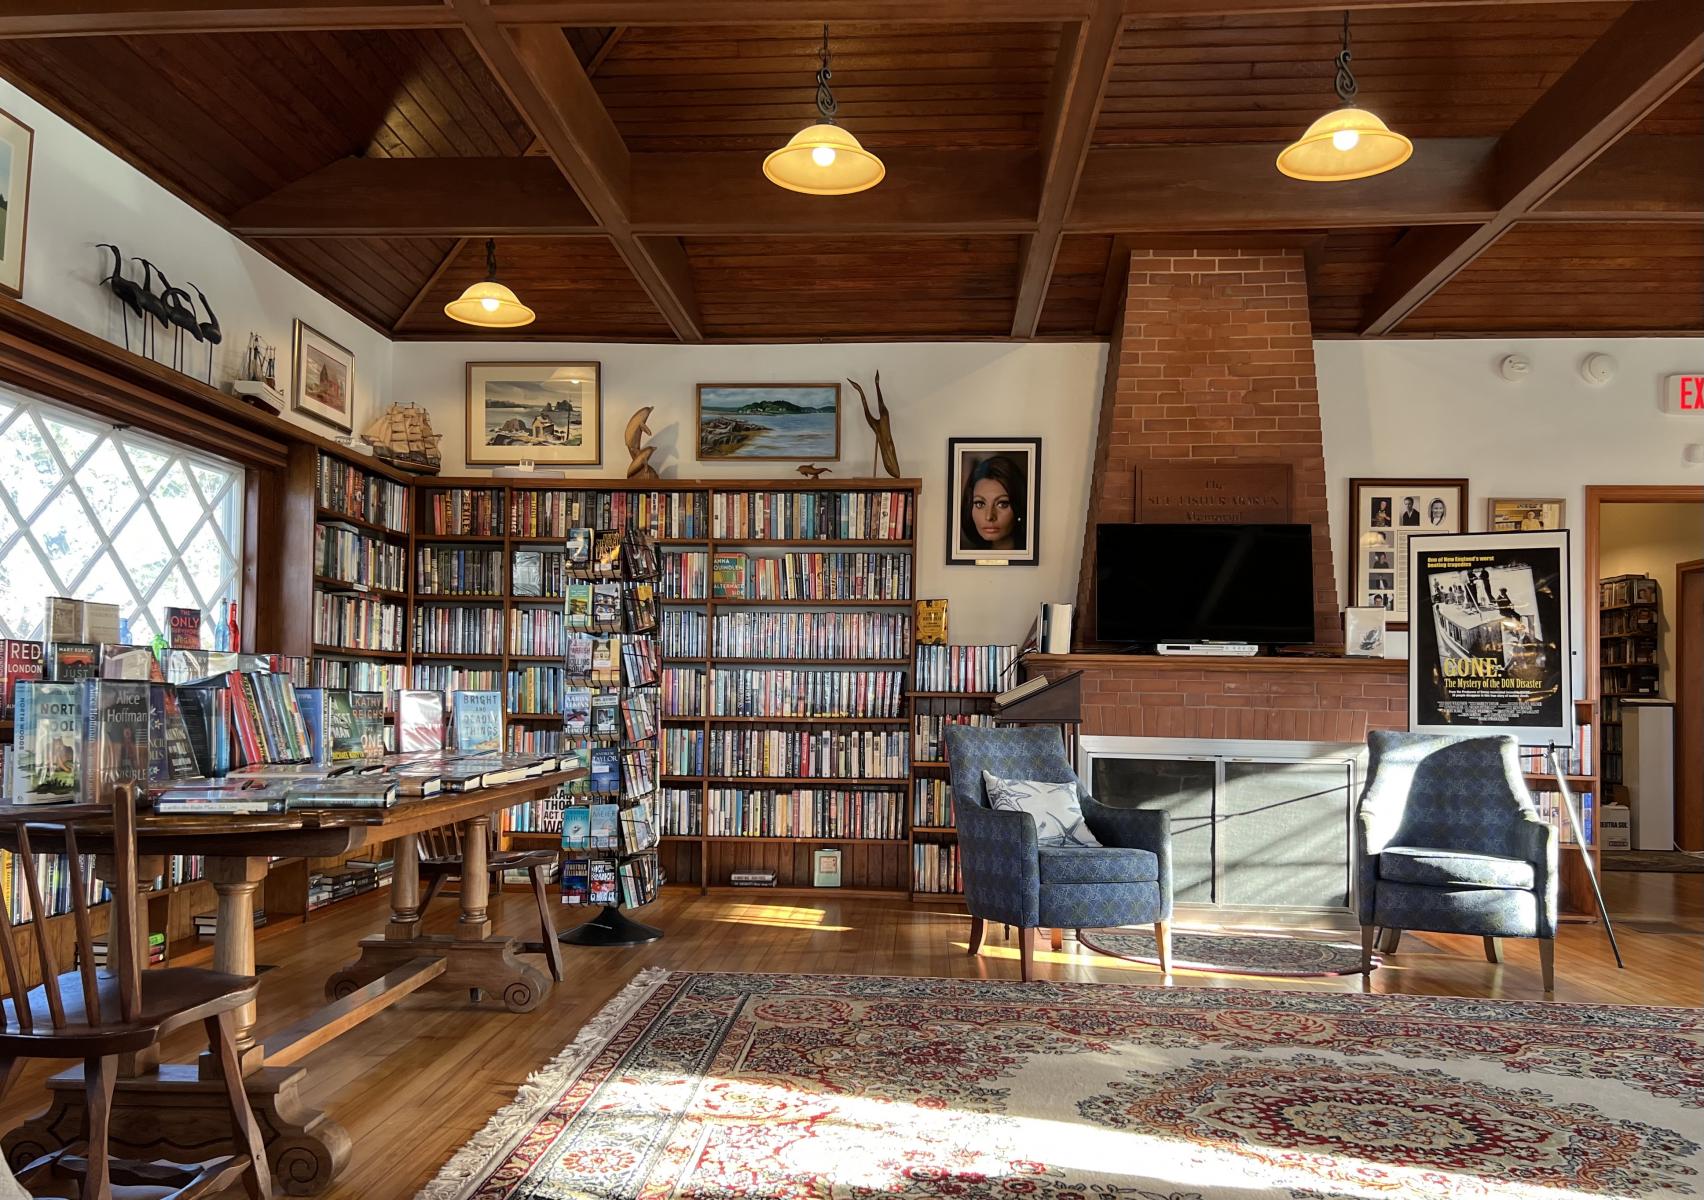 Snapshot of the cozy interior of the library on Orr's Island, Maine.